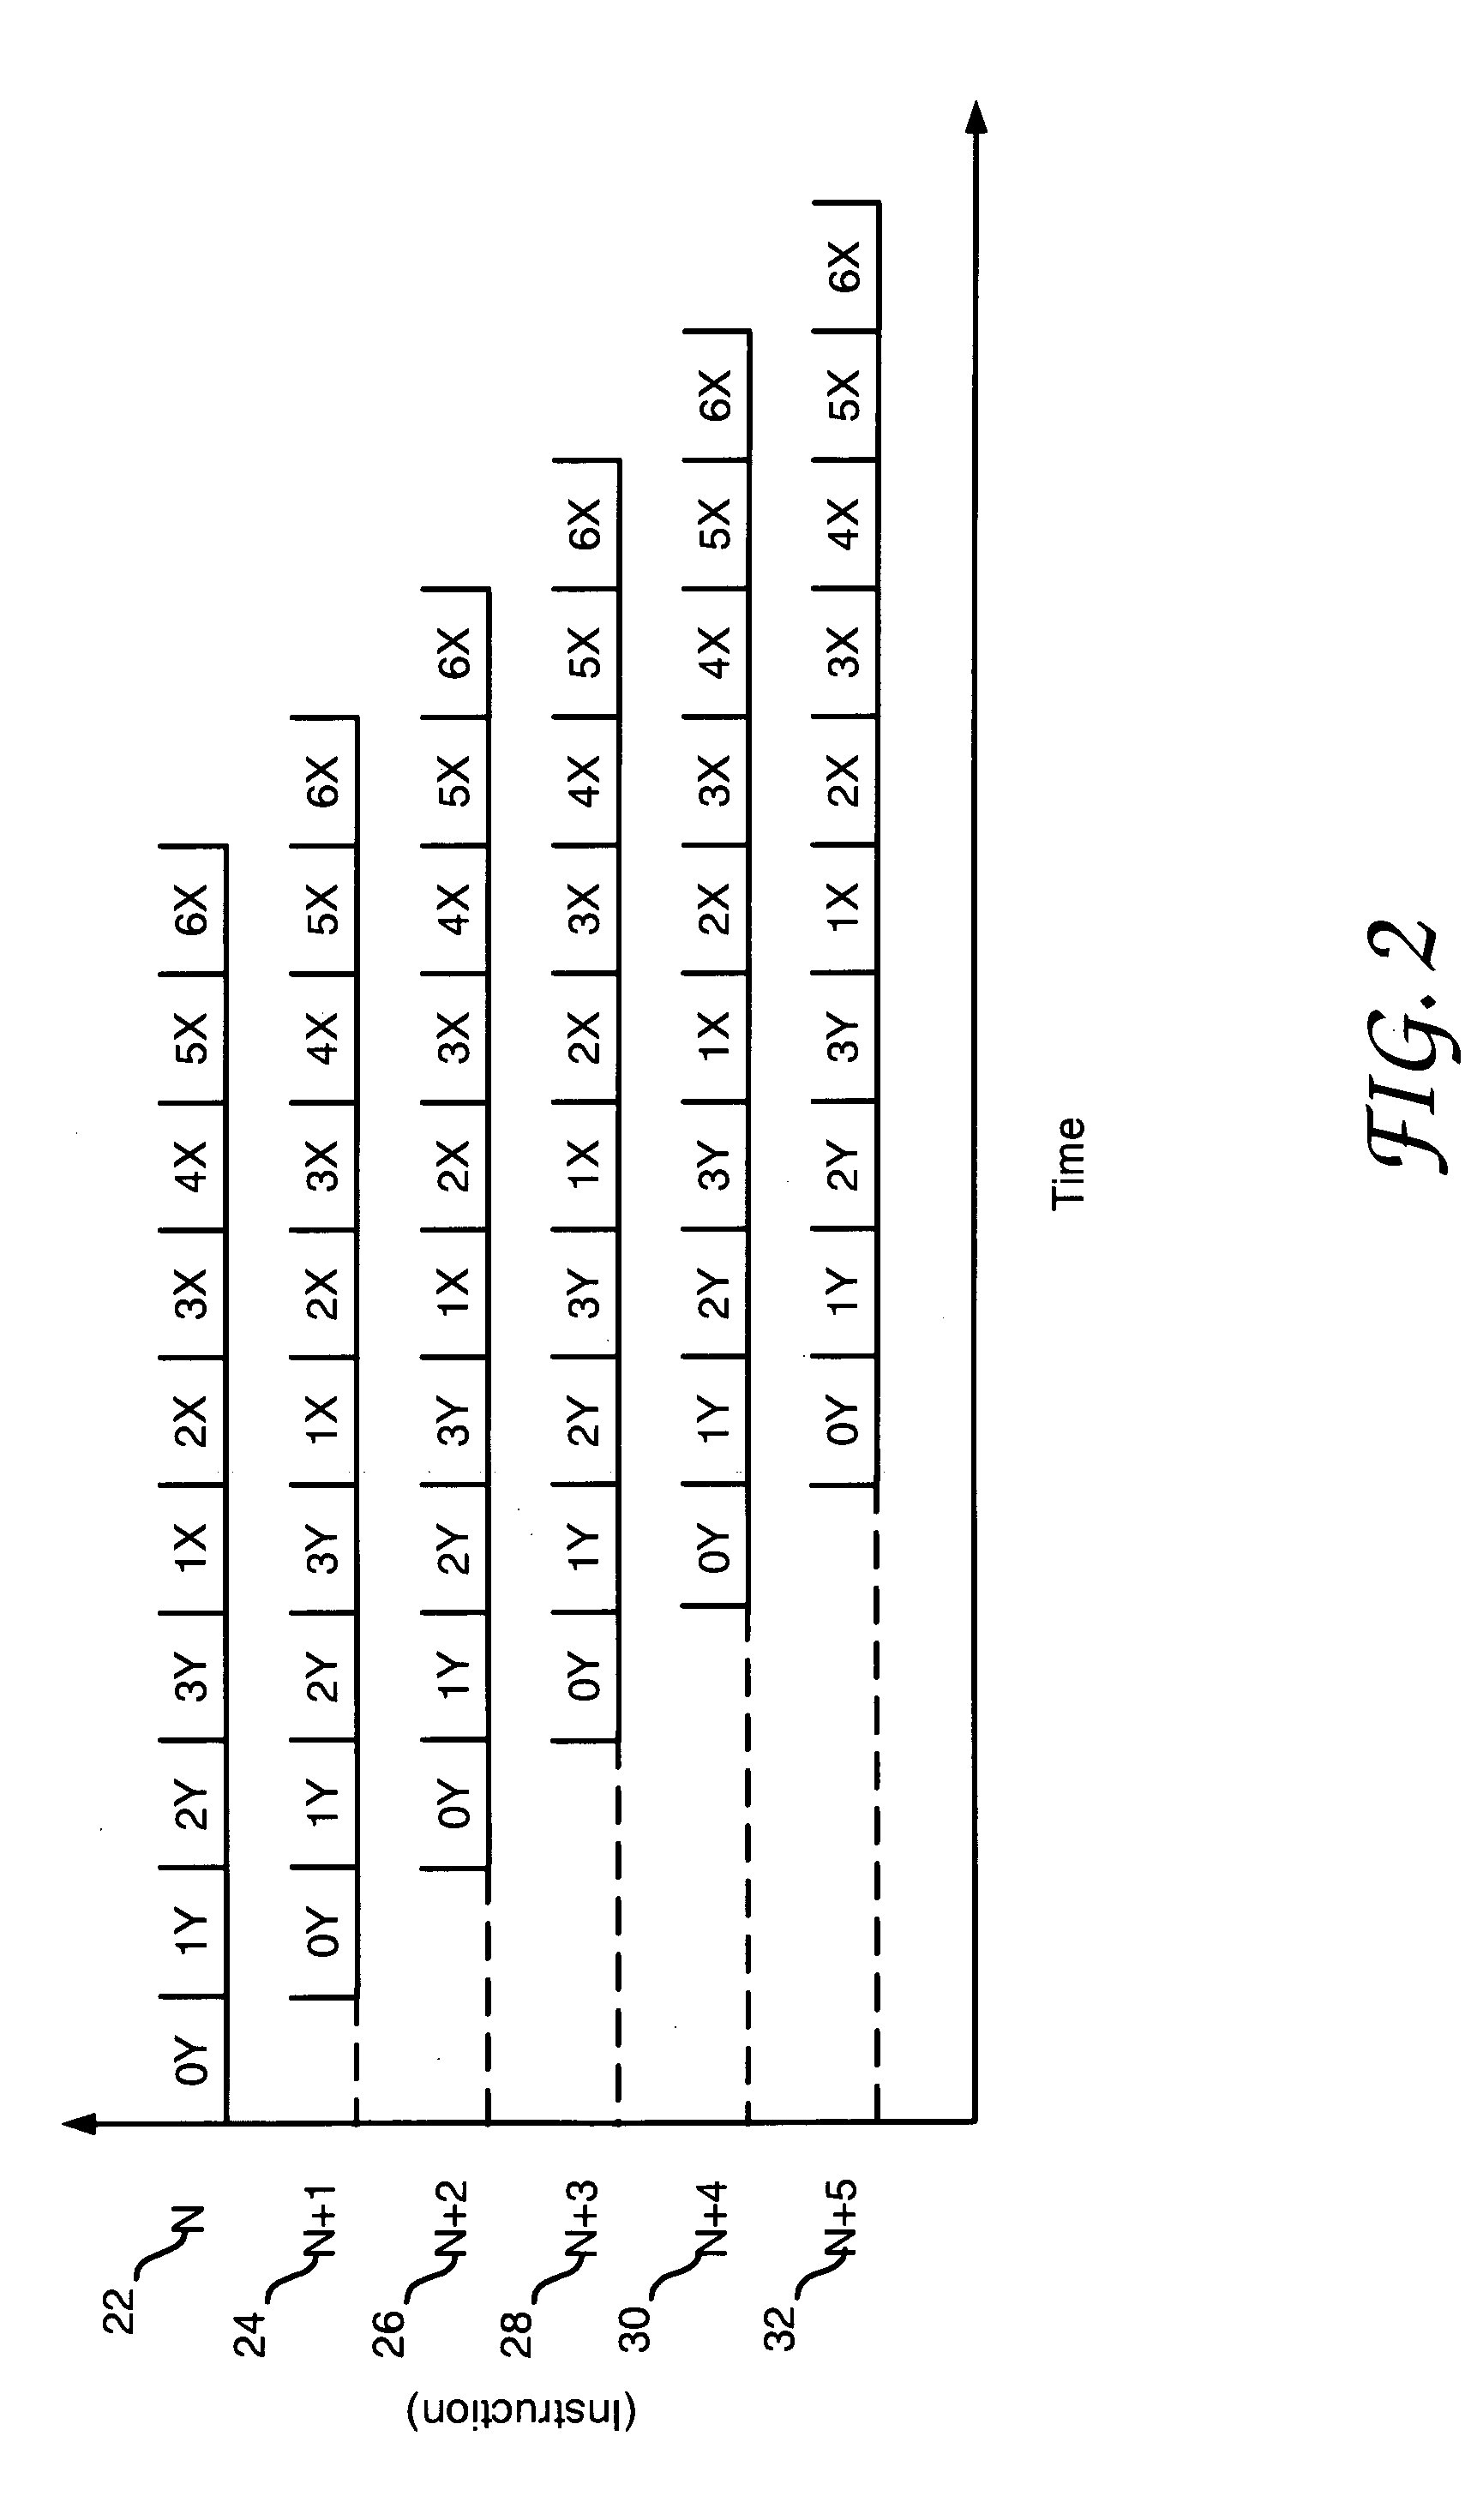 Condition indicator for use by a conditional branch instruction